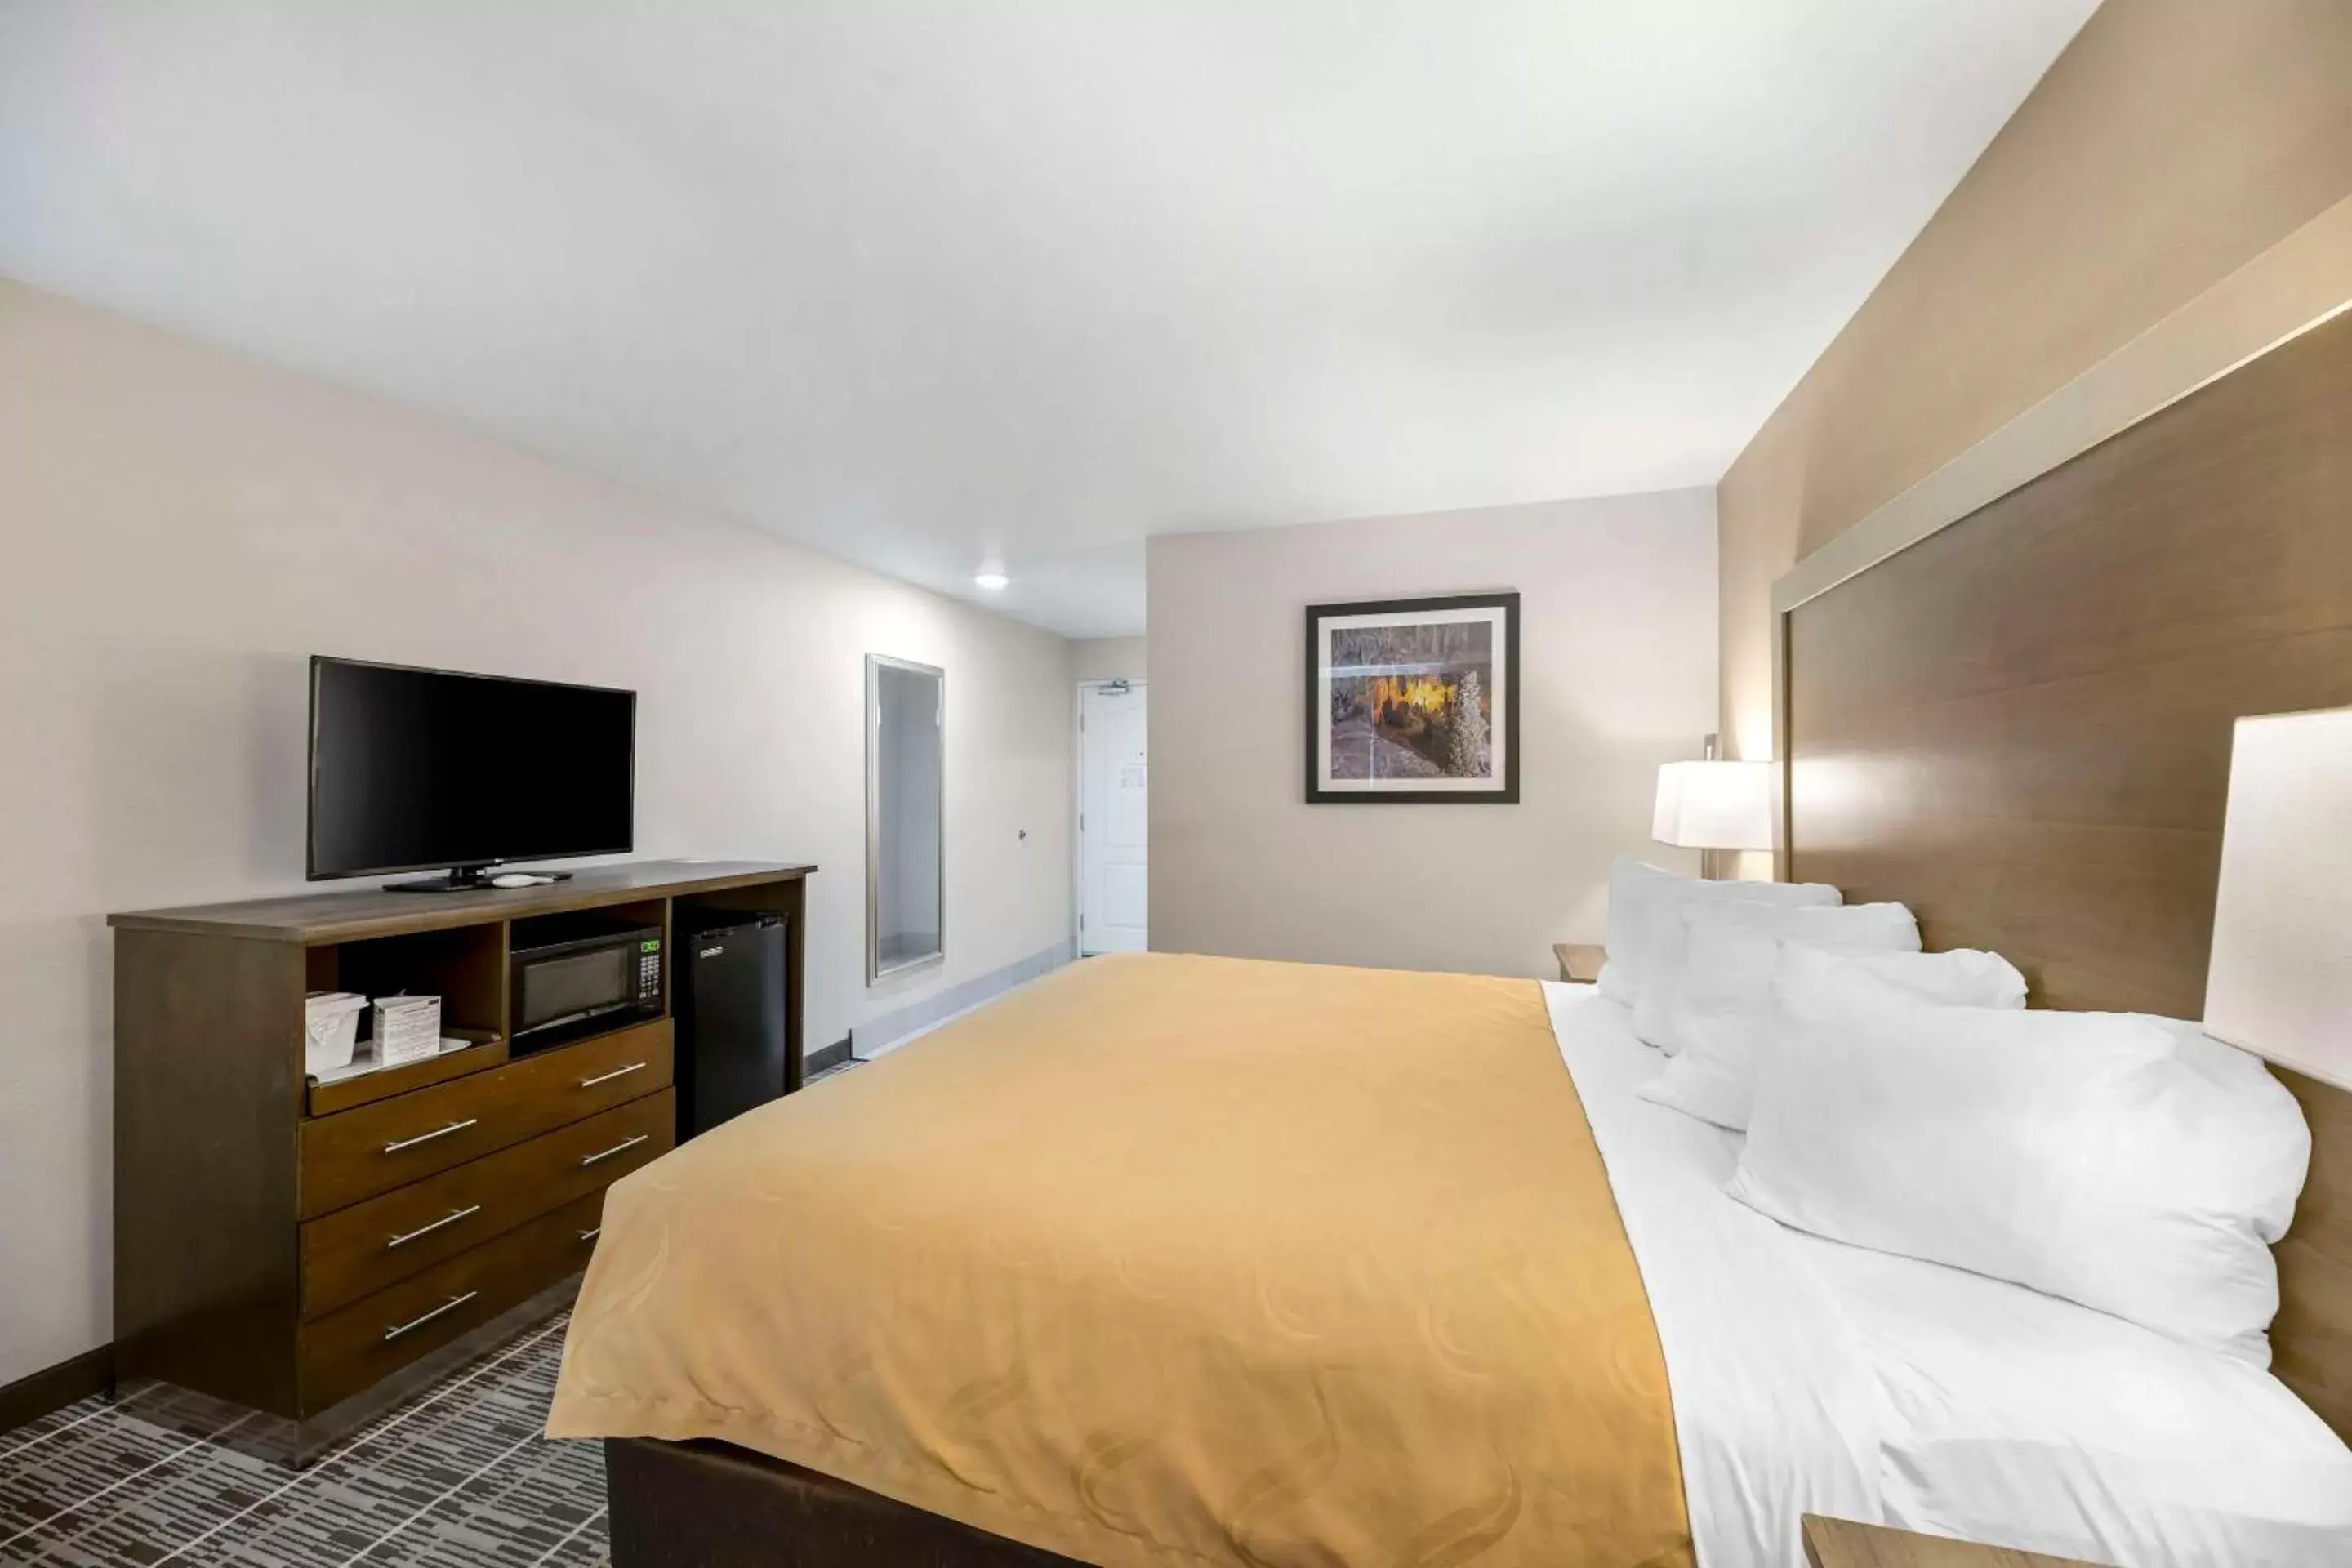 Bedroom, Bed in Quality Inn & Suites Carlsbad Caverns Area